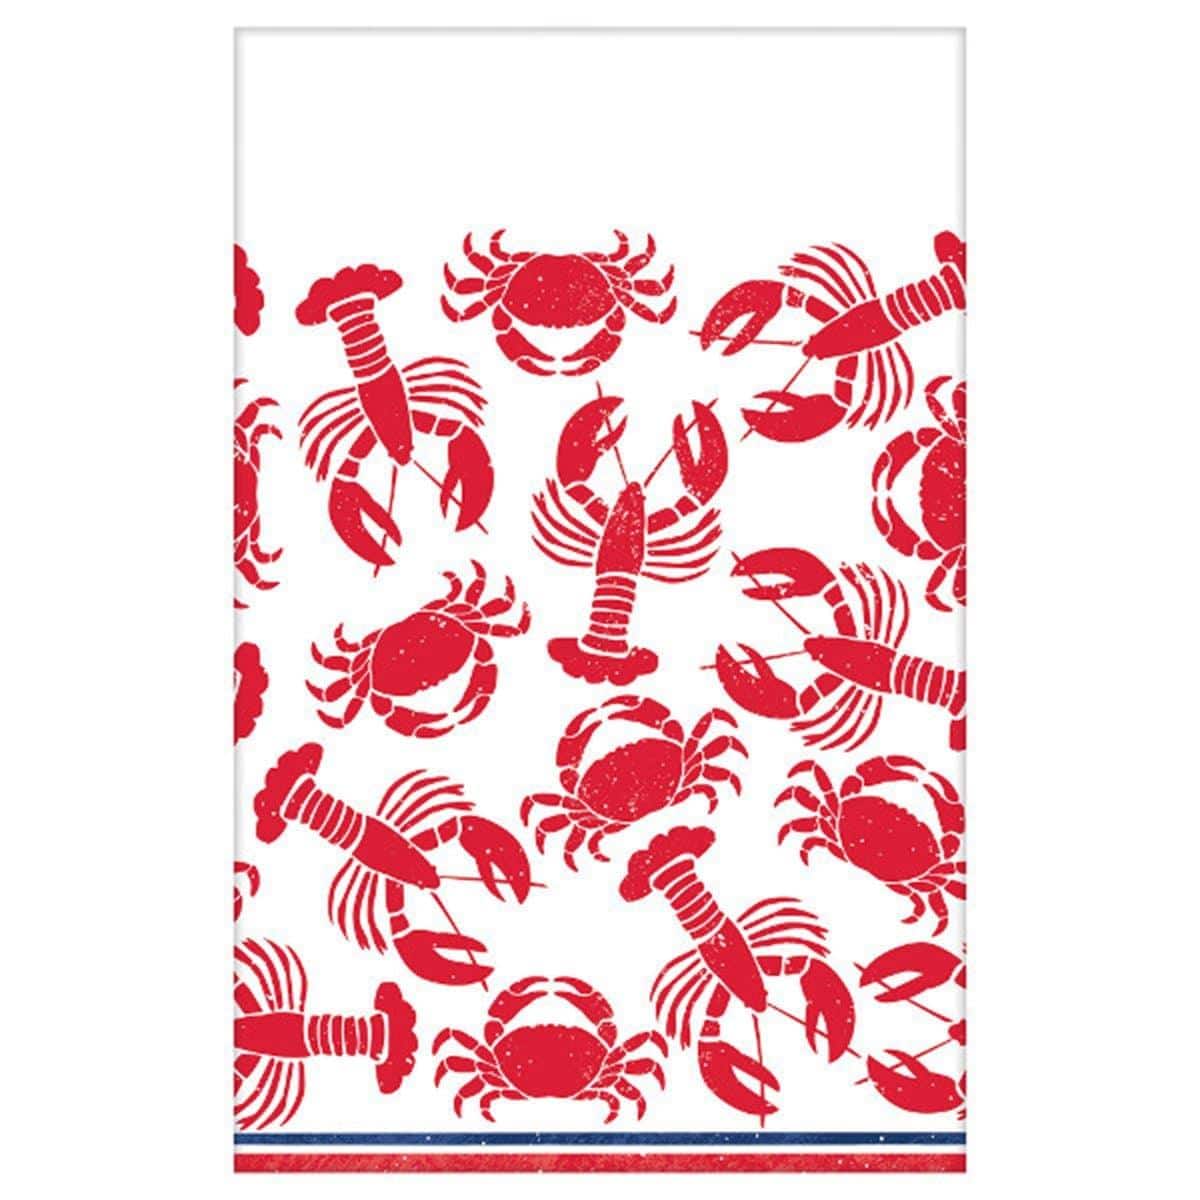 Buy Theme Party Seafood Tablecover sold at Party Expert